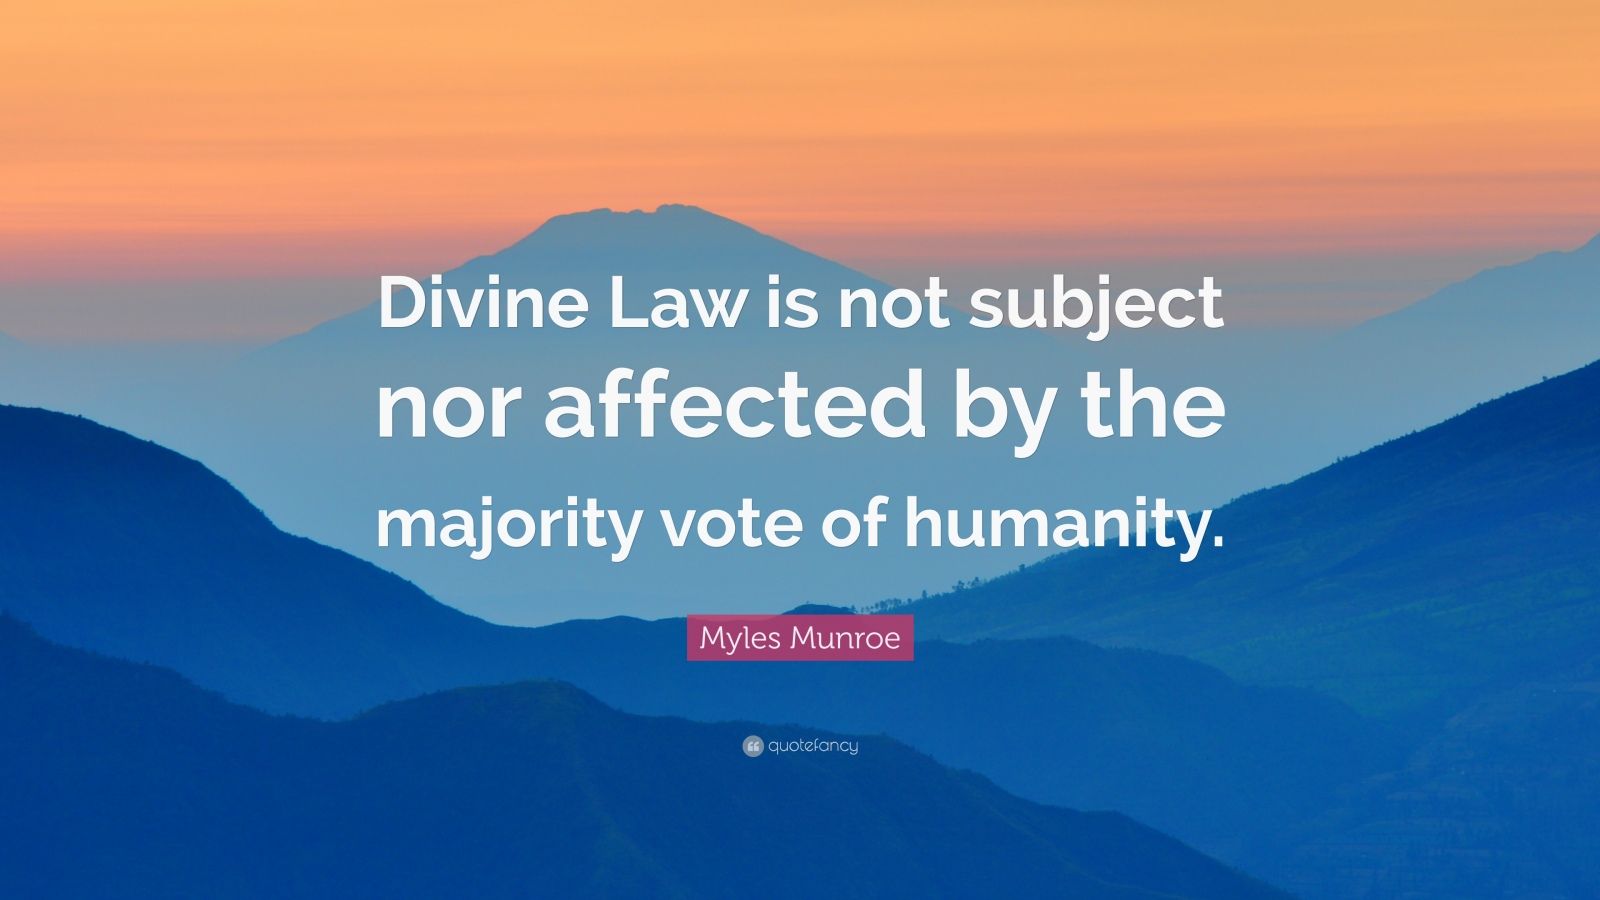 Myles Munroe Quote: “Divine Law is not subject nor affected by the ...